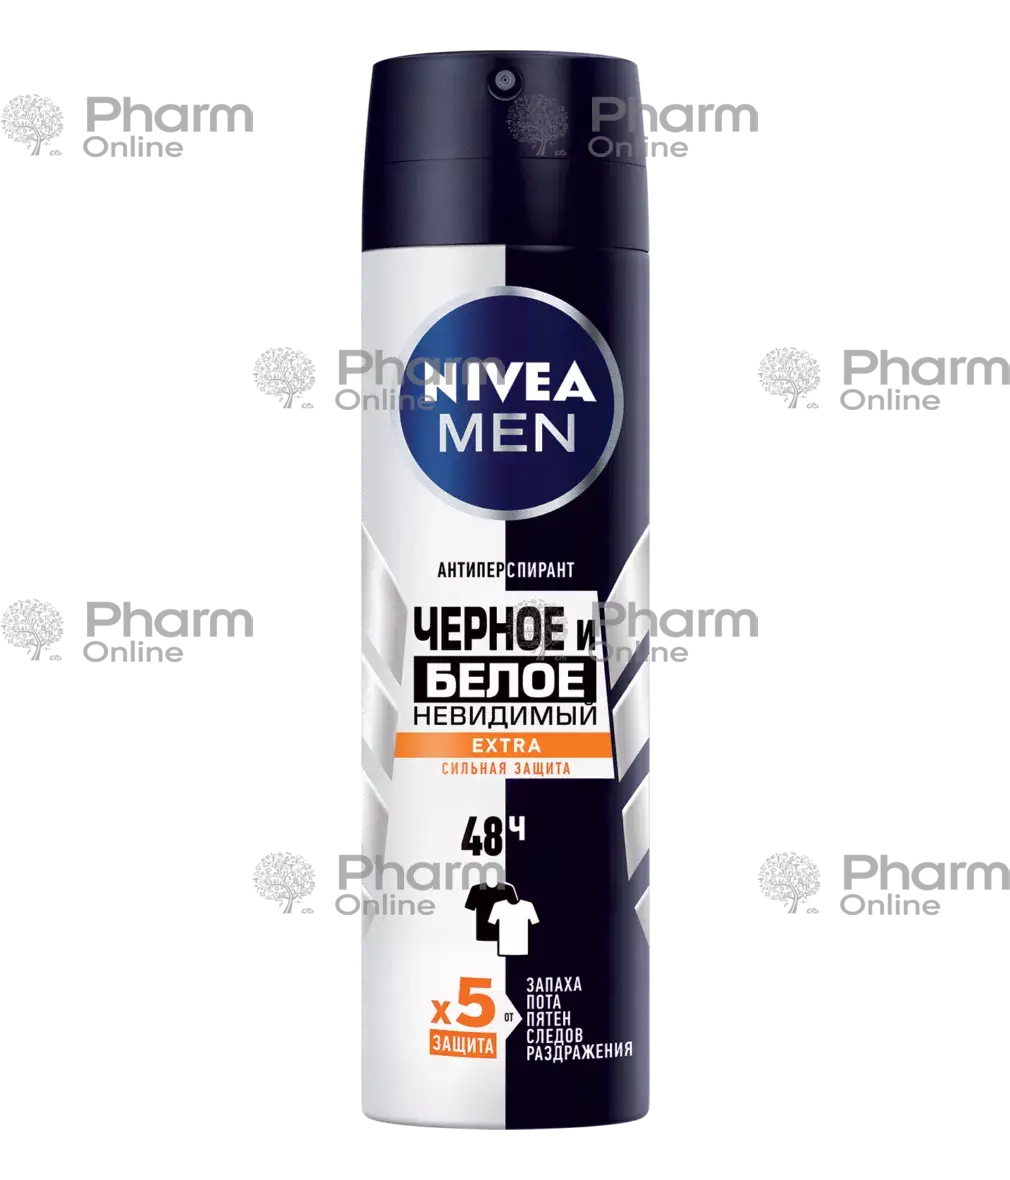 Nivea Antip. deo black and white invisible extra strong protection (9606)(0534)(5388) 150 ml (Cosmet